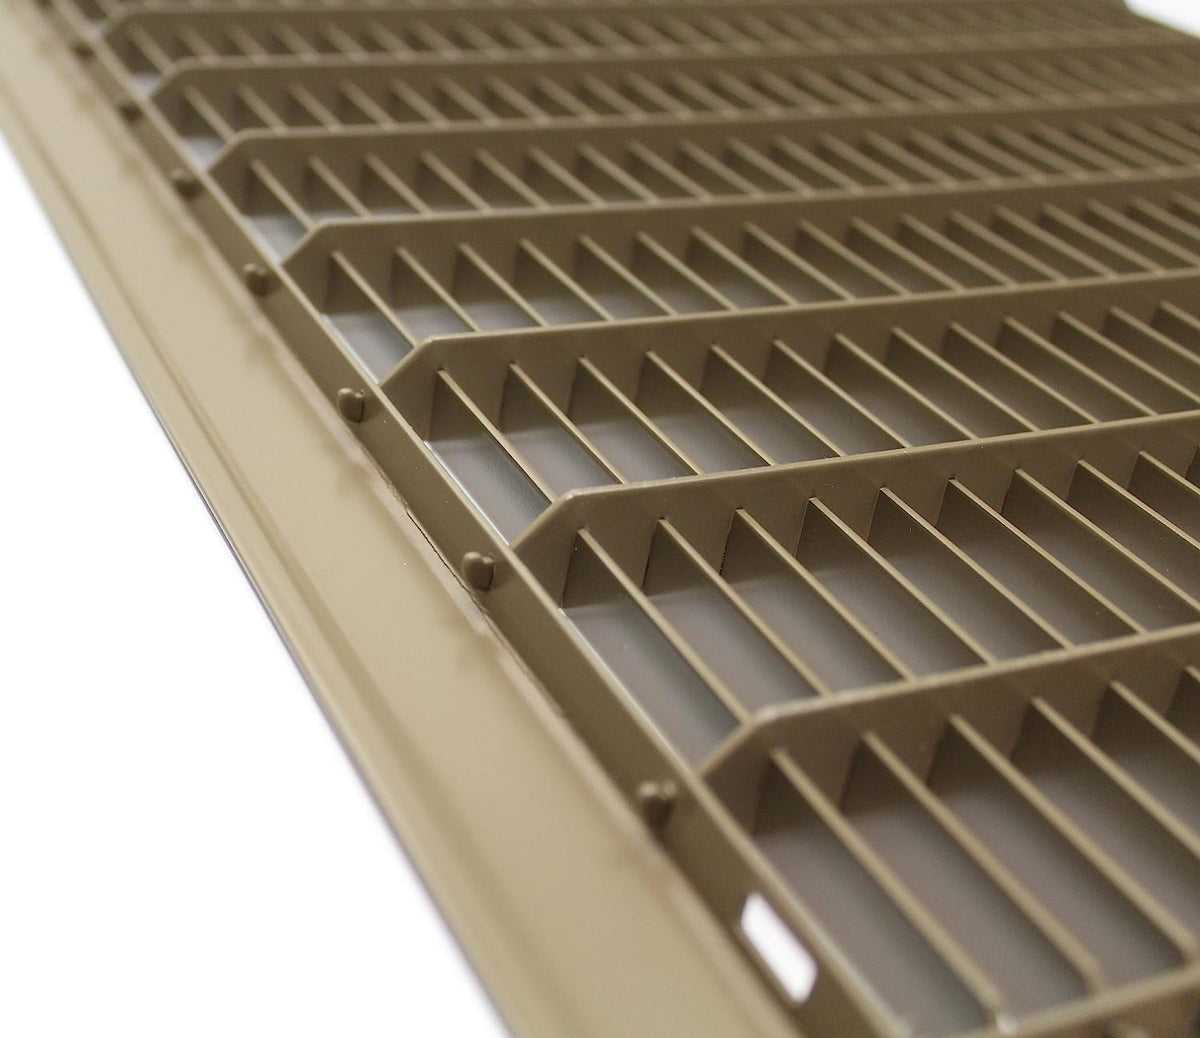 4&quot; x 12&quot; Or 12&quot; X 4&quot; Heavy Duty Floor Grille - Fixed Blades Air Grille - Brown [Outer Dimensions: 5.75 X 13.75]